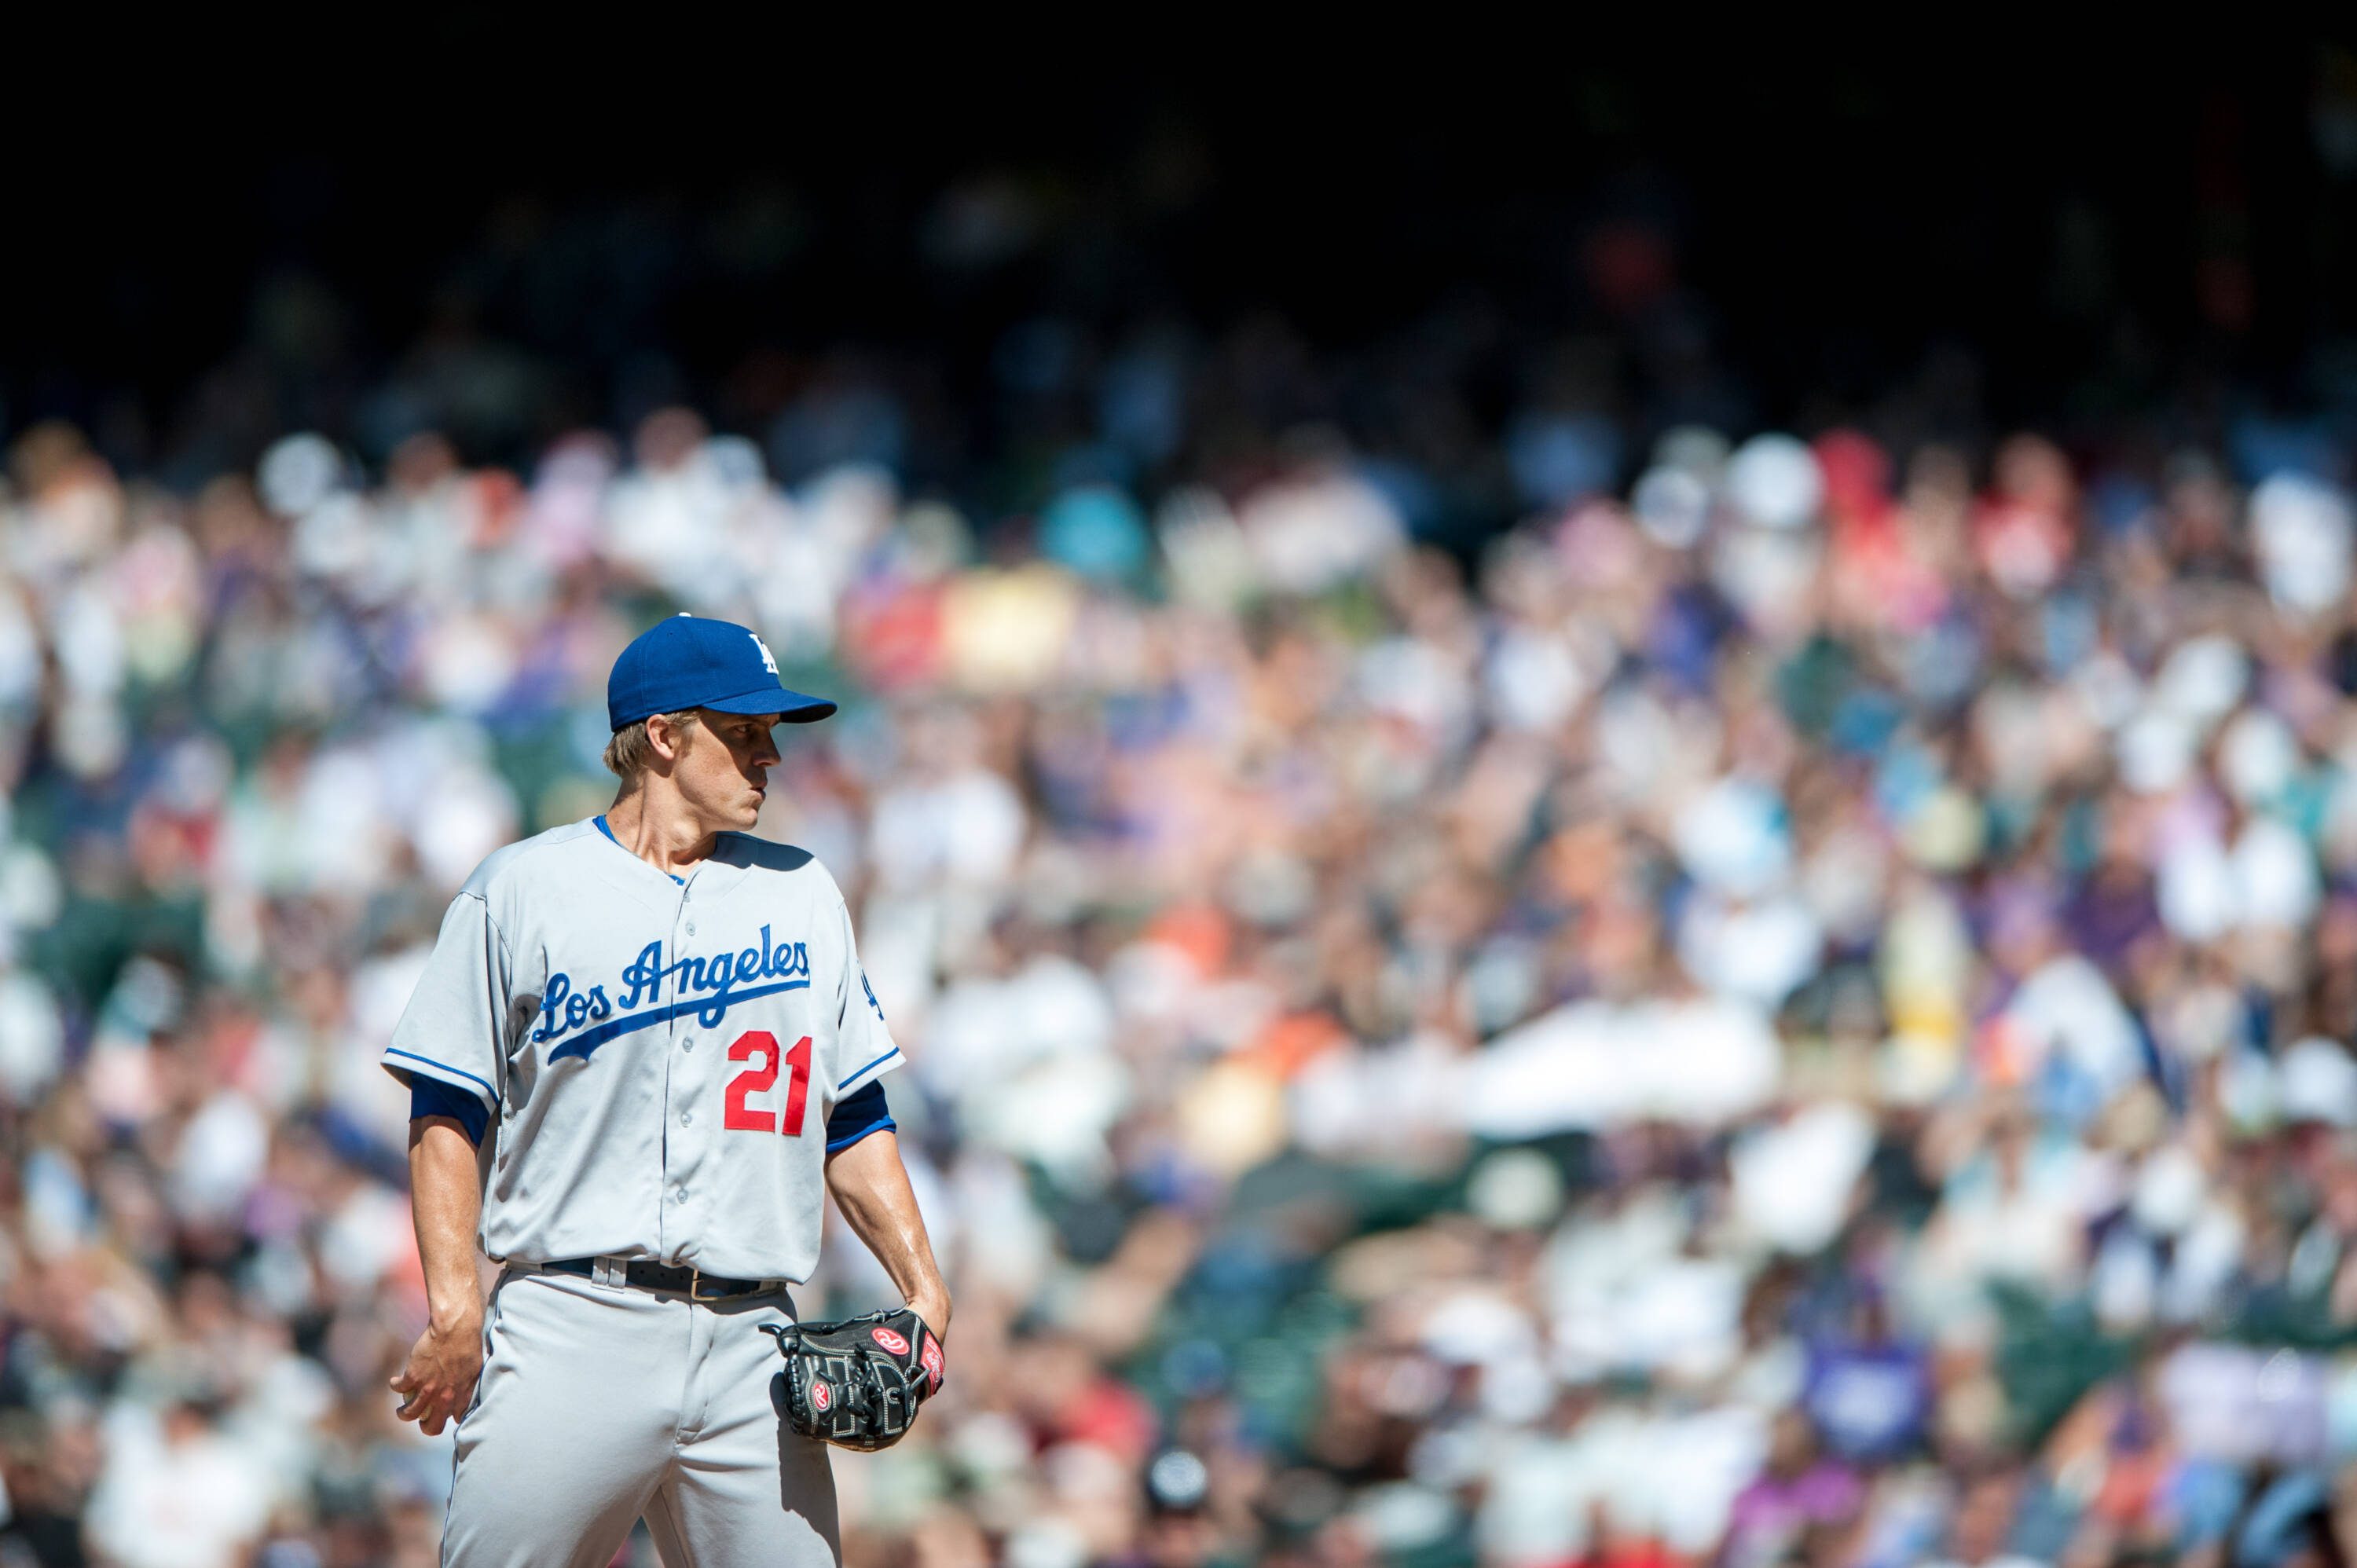 Zack Greinke says he prefers playing without fans in ballparks